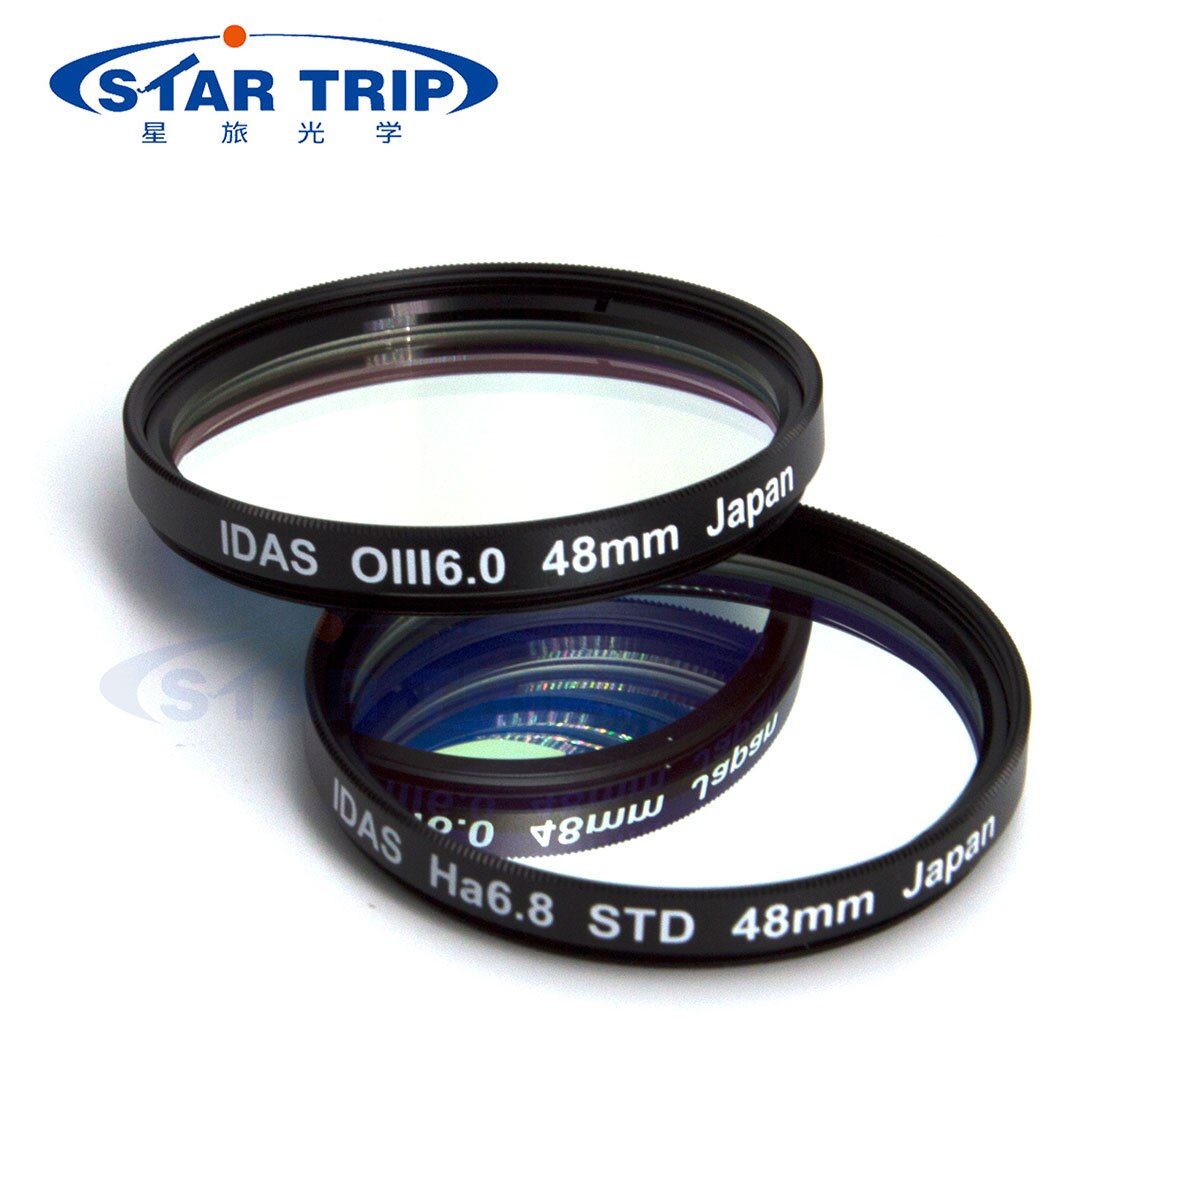 IDAS 2" Narrowband H-alpha 6.8nm/SII 6.3nm/OIII 6.0nm Filter Set - Class UHS (2.5mm)